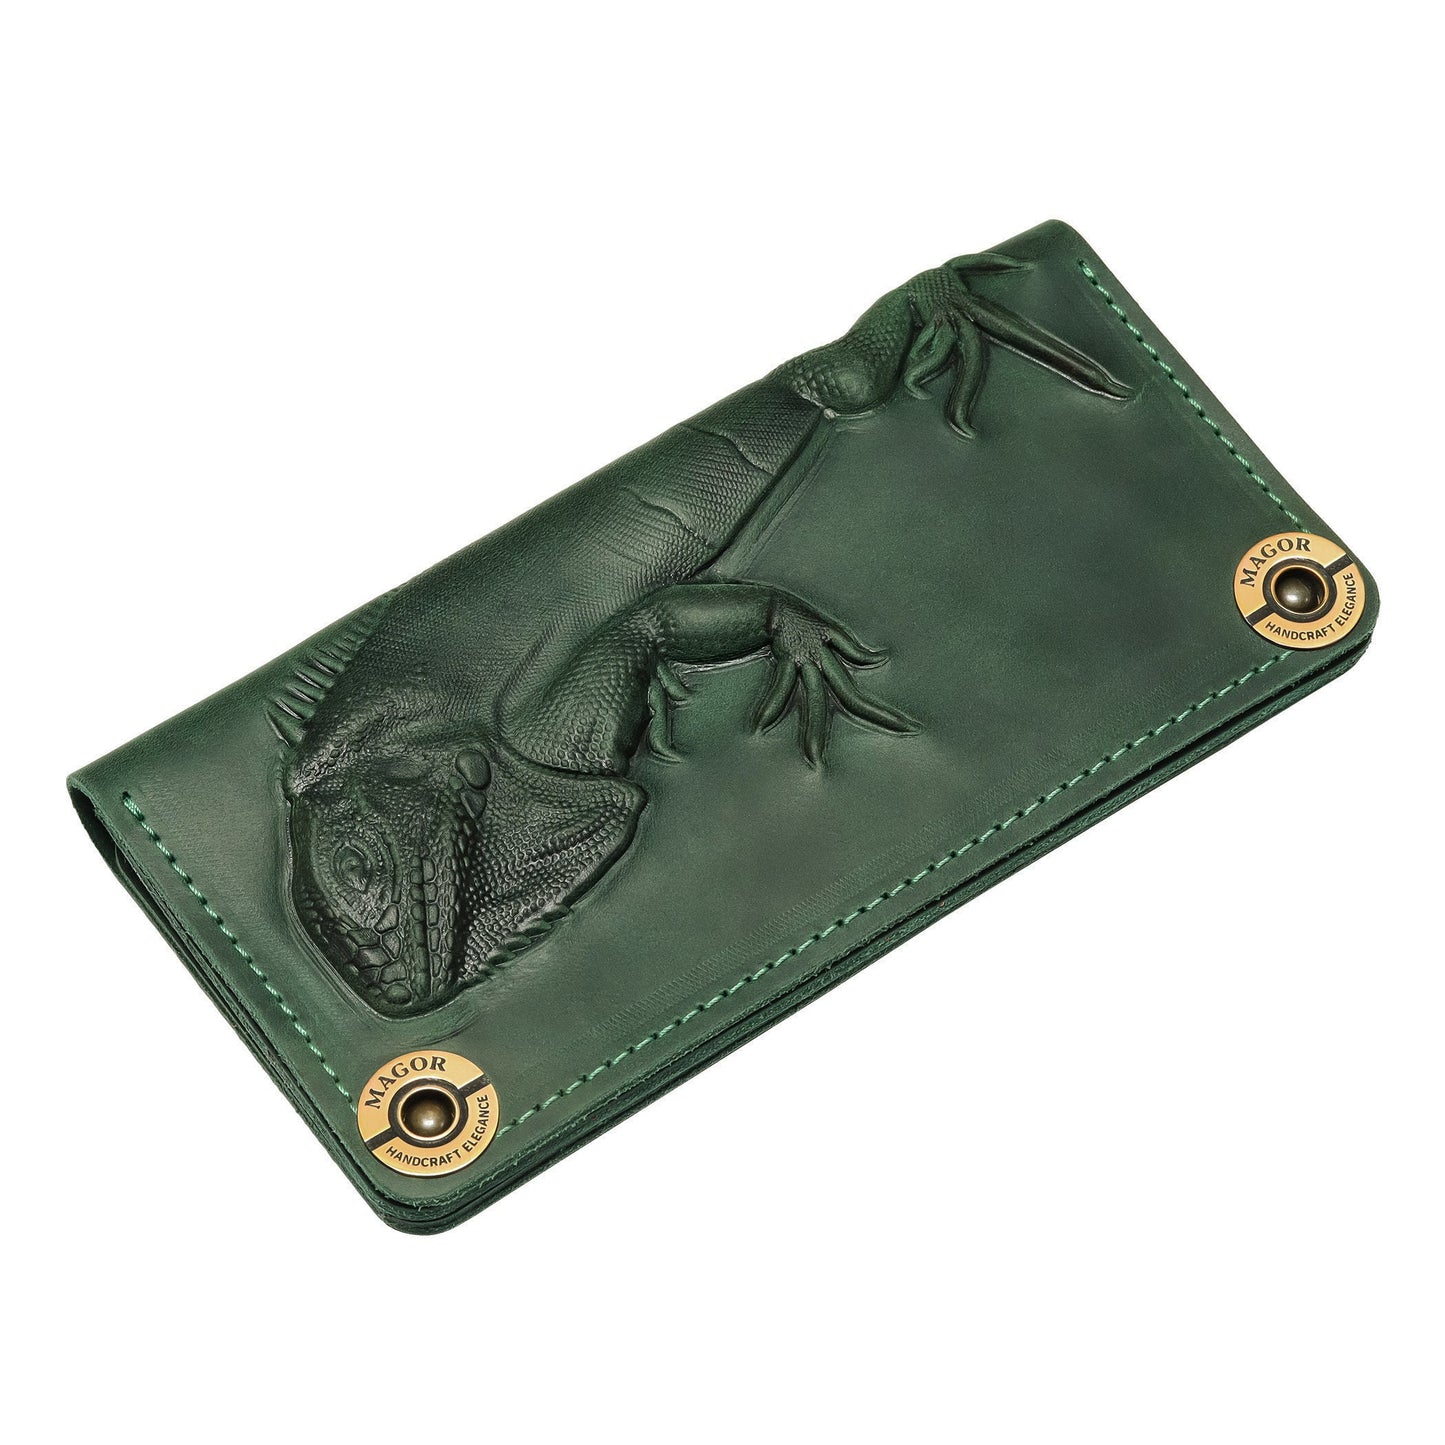 Women's Wallet | Ladies Leather Wallet With Card Holder | Zip Coin Pocket | Women's Genuine Leather Wallet | Gift For Her